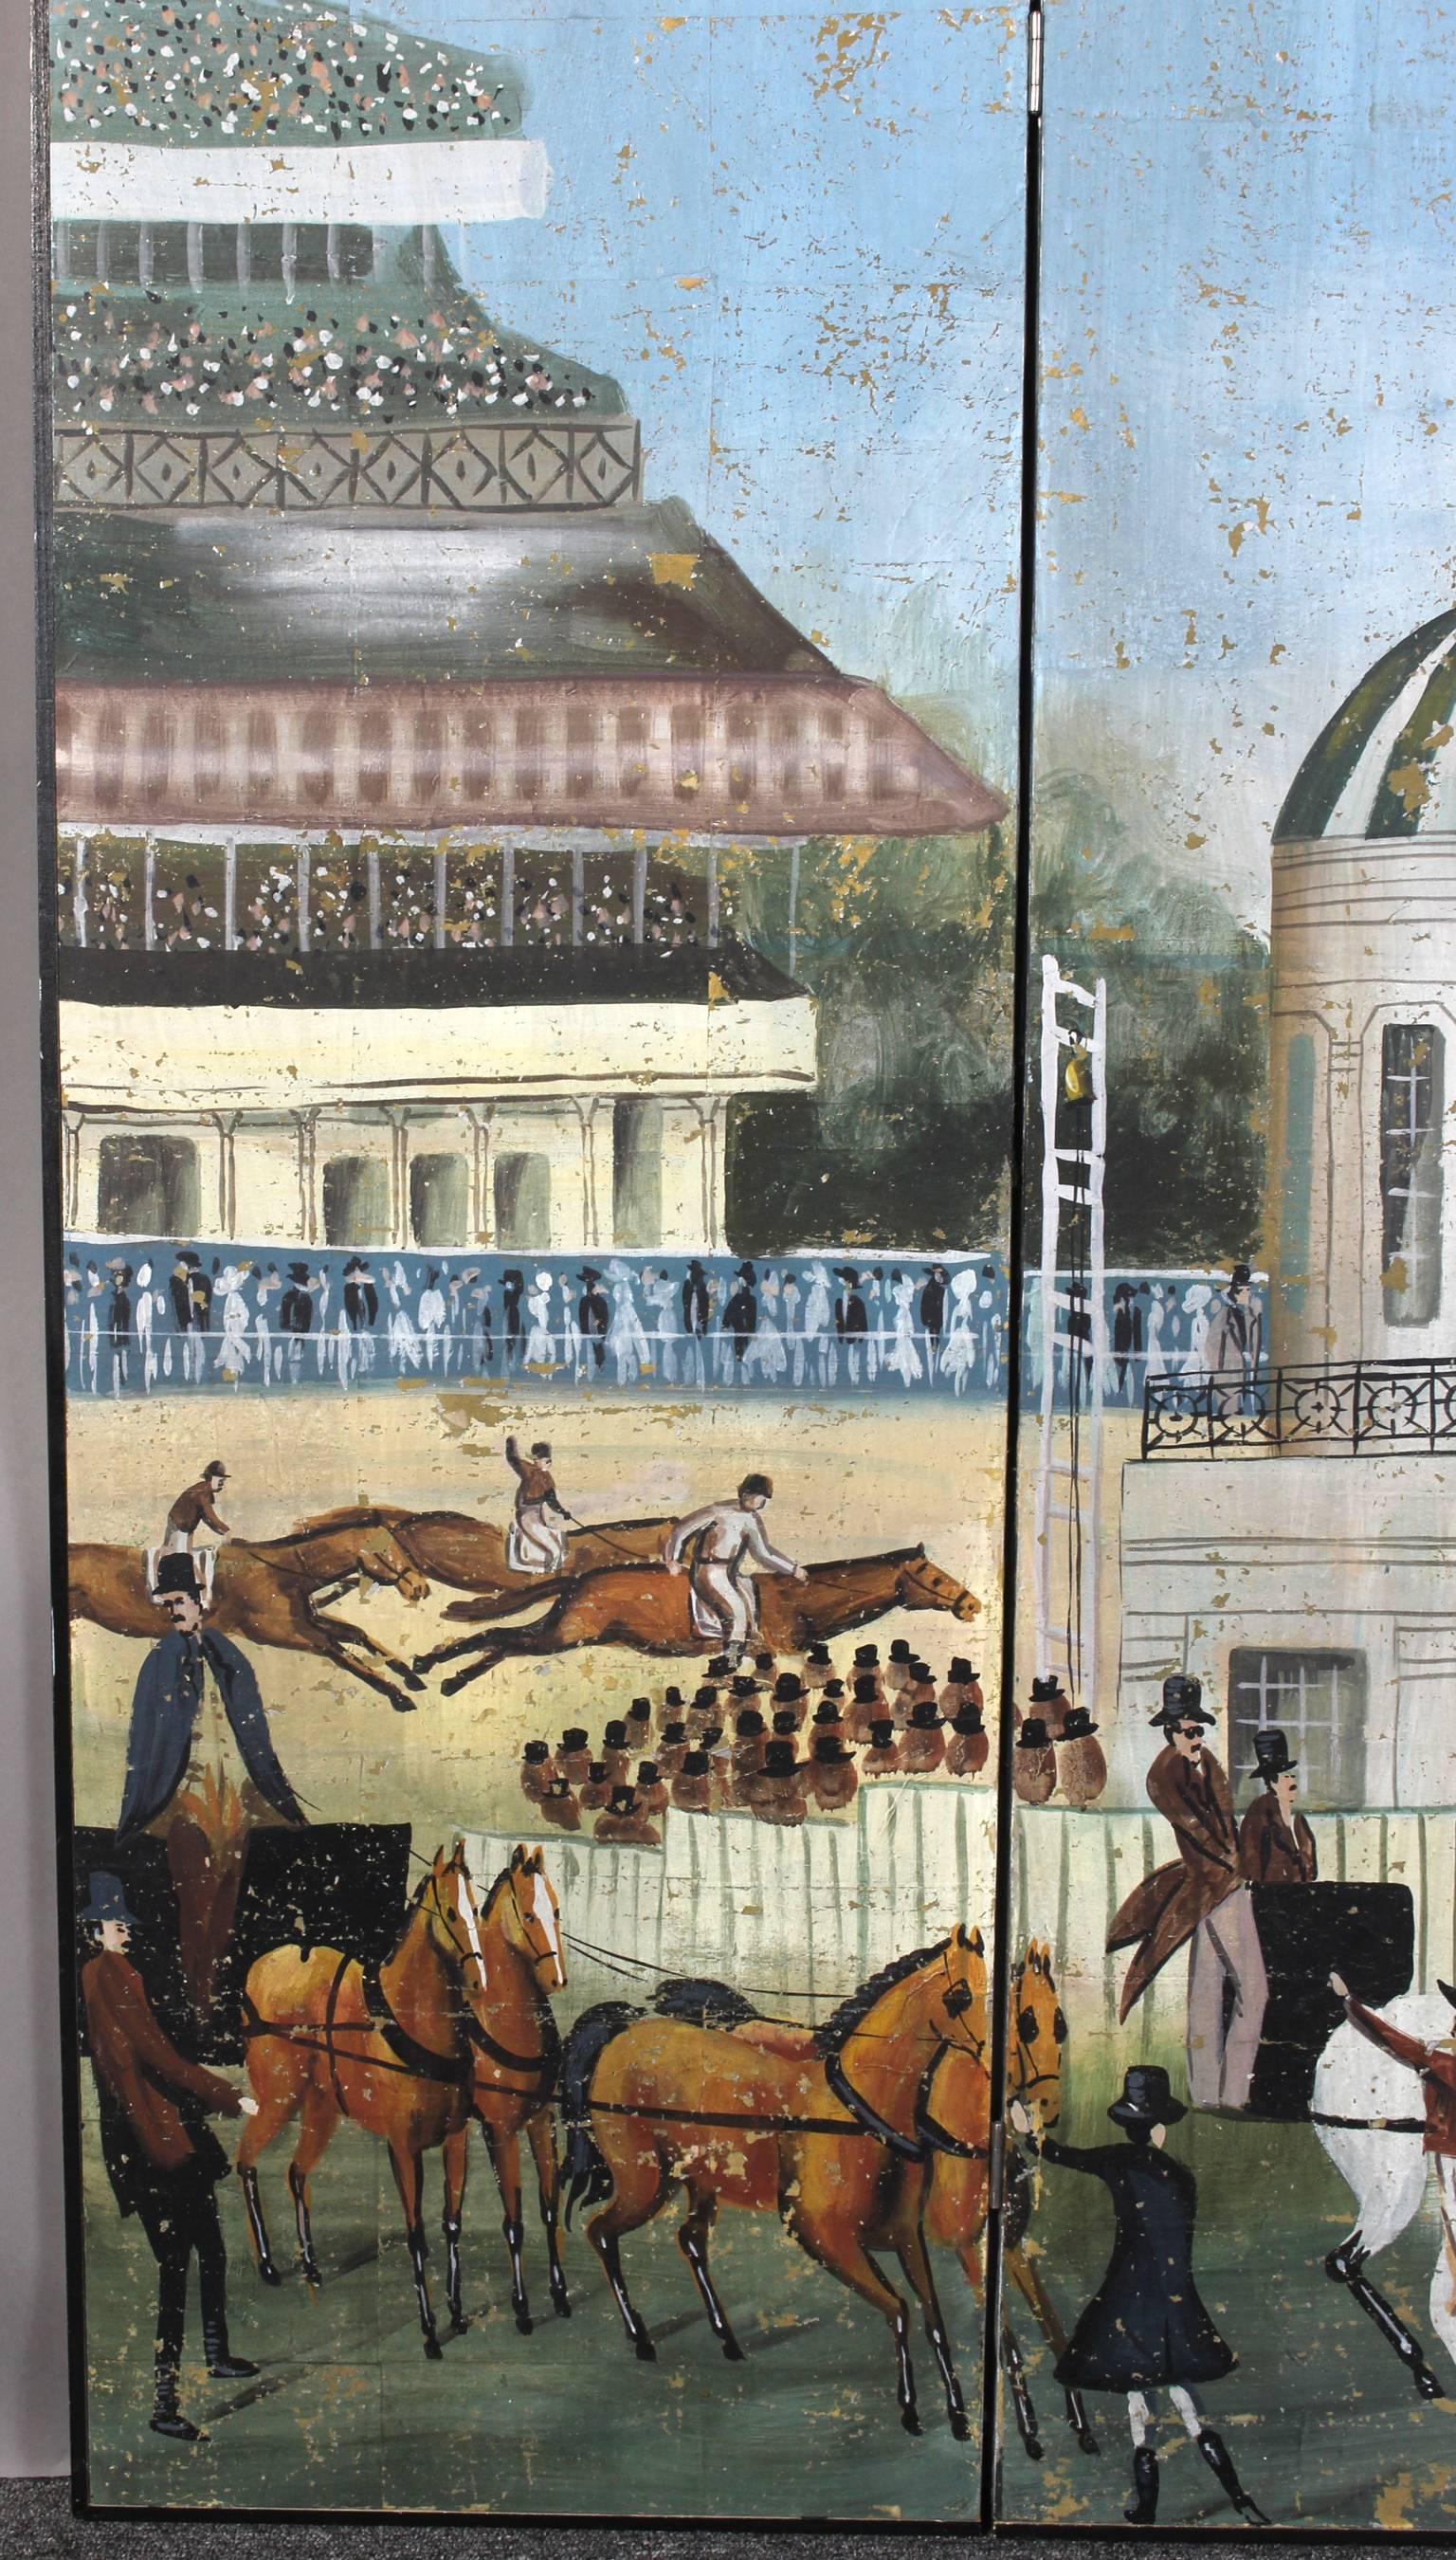 A charming hand-painted four panel folding screen depicting an English horse racing scene complete with horses and jockeys, spectators in the foreground and a large grandstand flying the Union Jack.